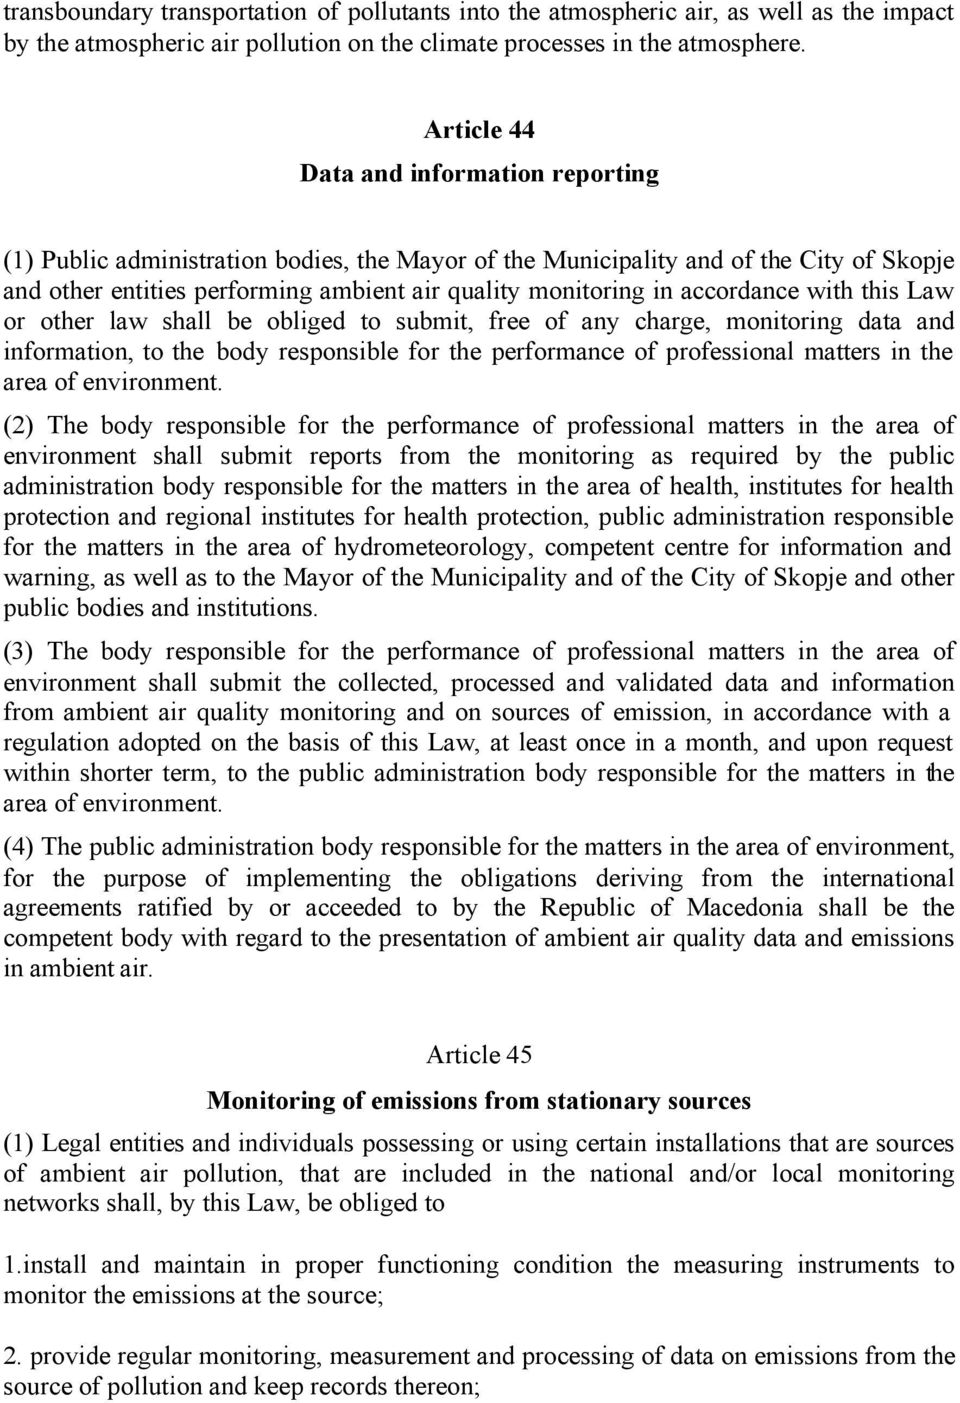 accordance with this Law or other law shall be obliged to submit, free of any charge, monitoring data and information, to the body responsible for the performance of professional matters in the area